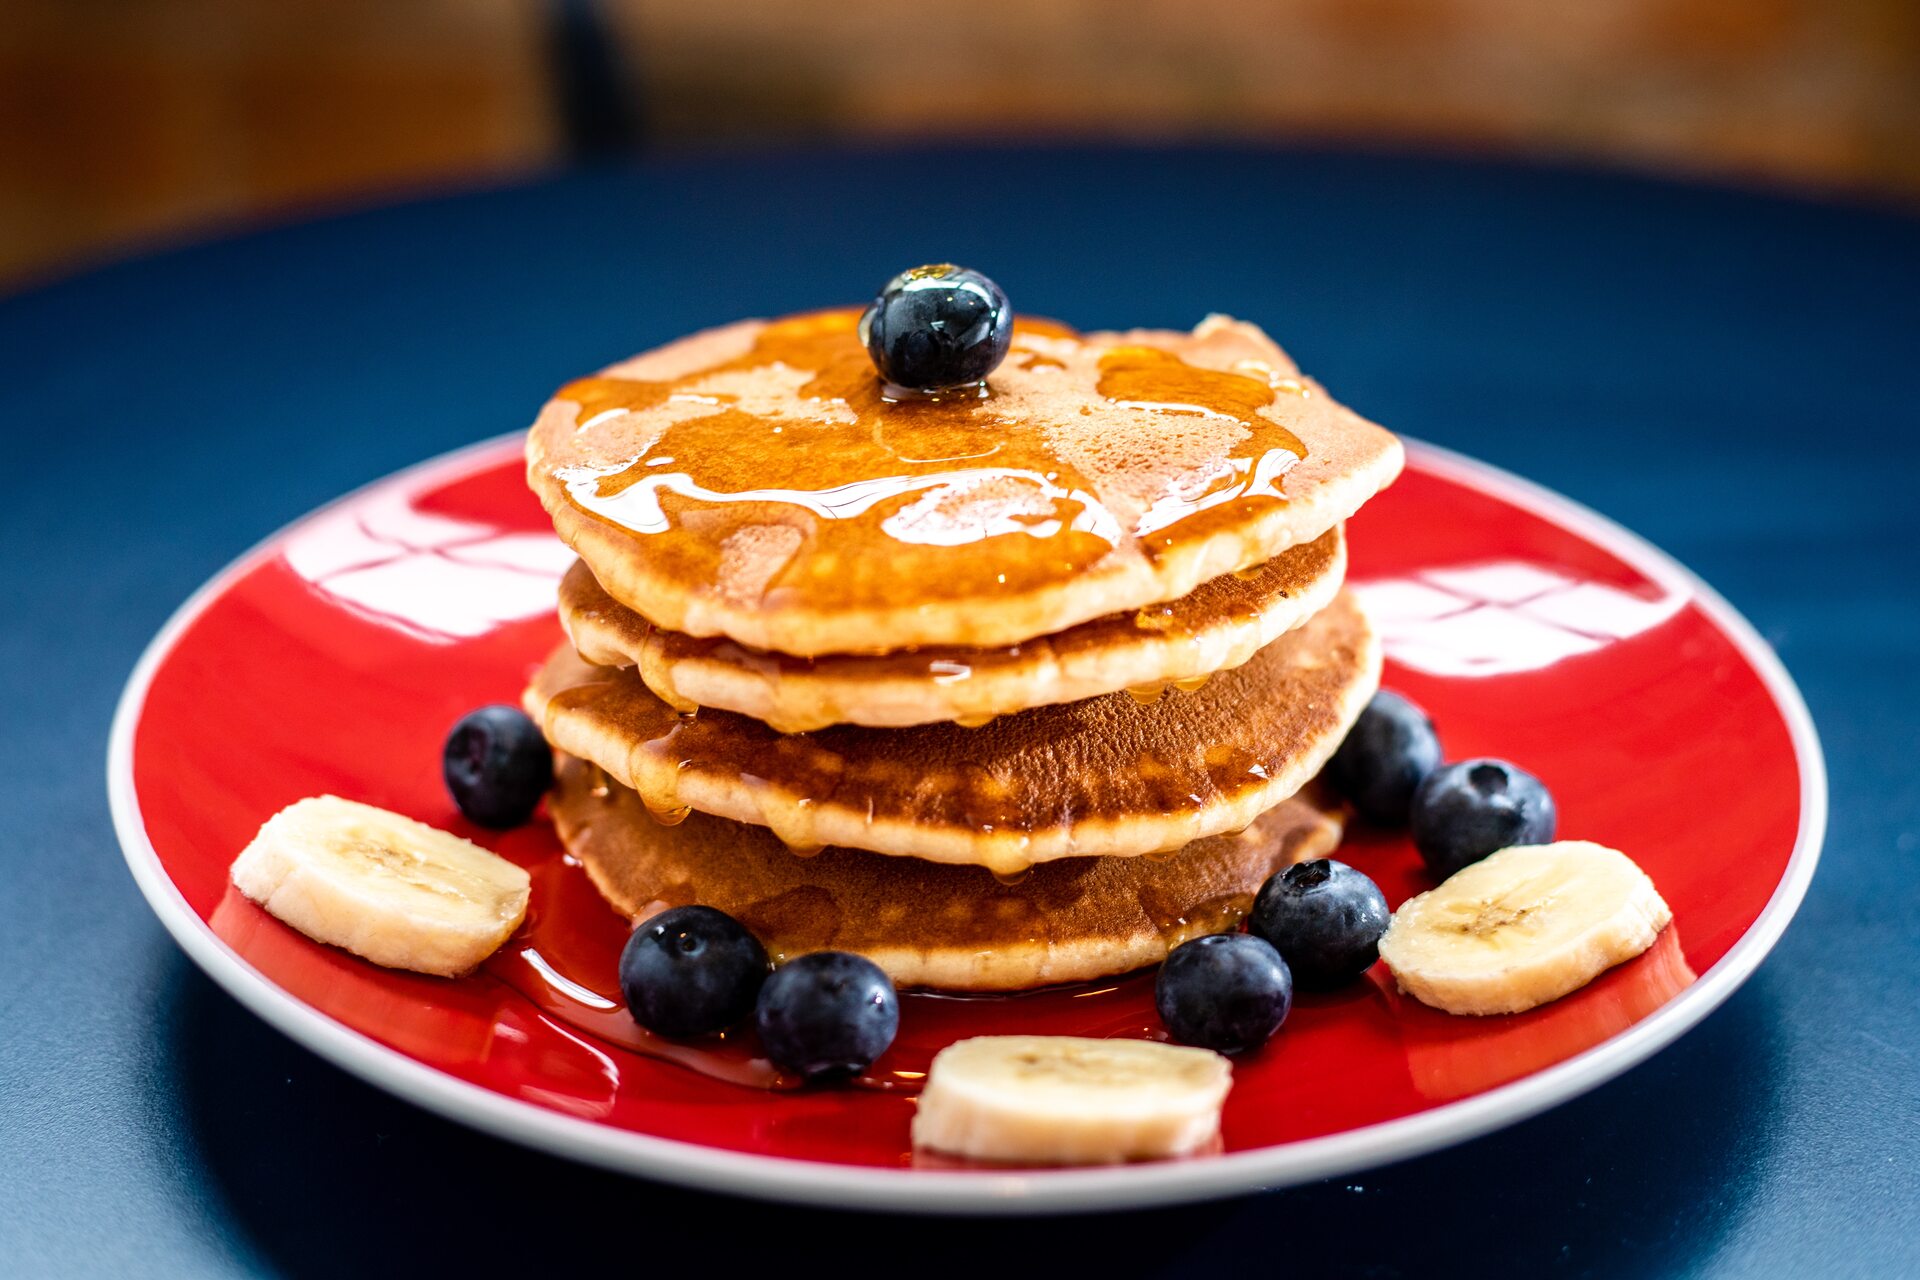 Pancakes with blueberries, banana slices, and maple syrup on a plate